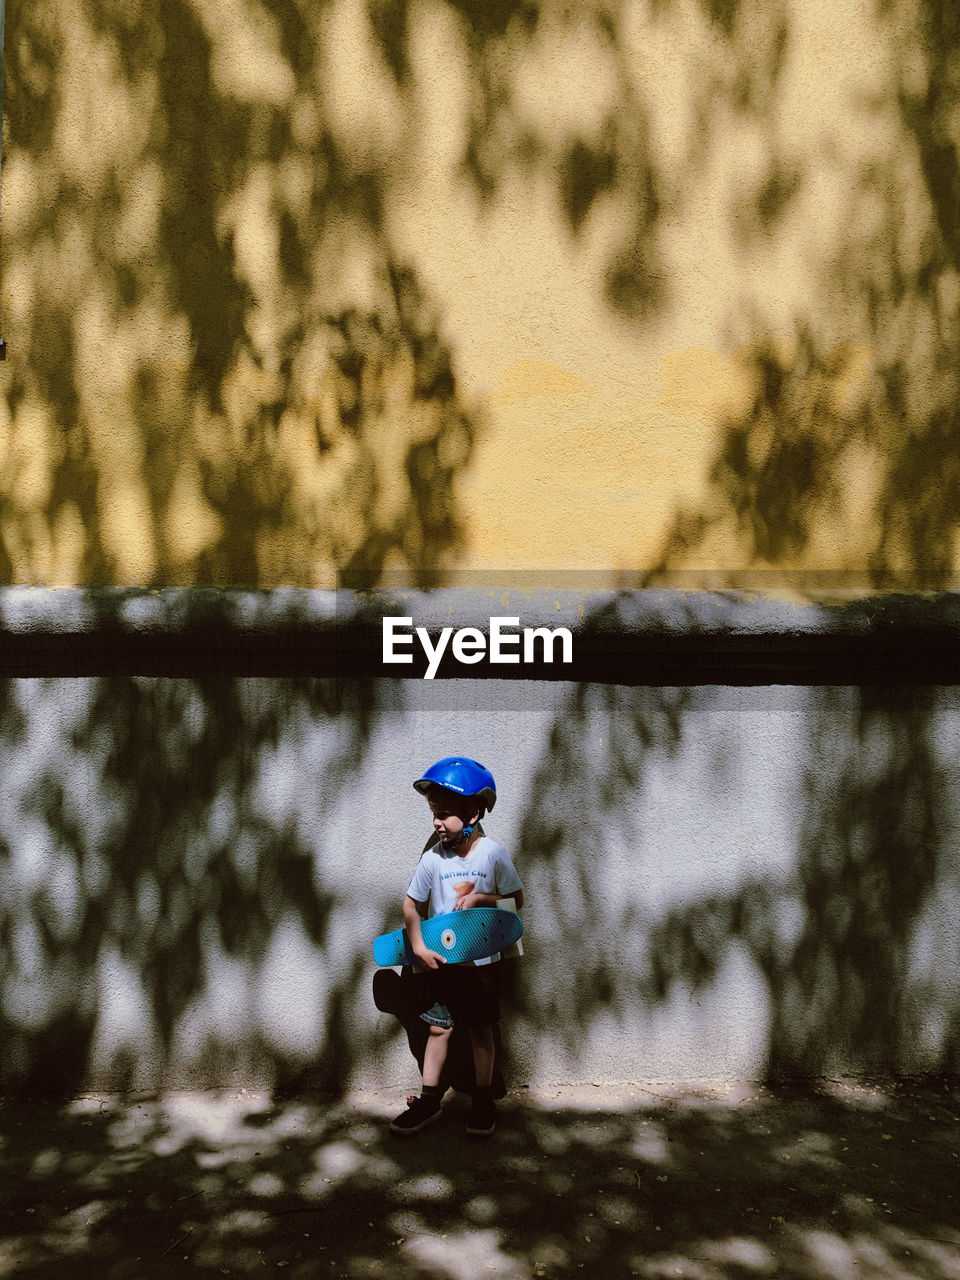 A boy in a helmet with a skateboard in his hands near the wall